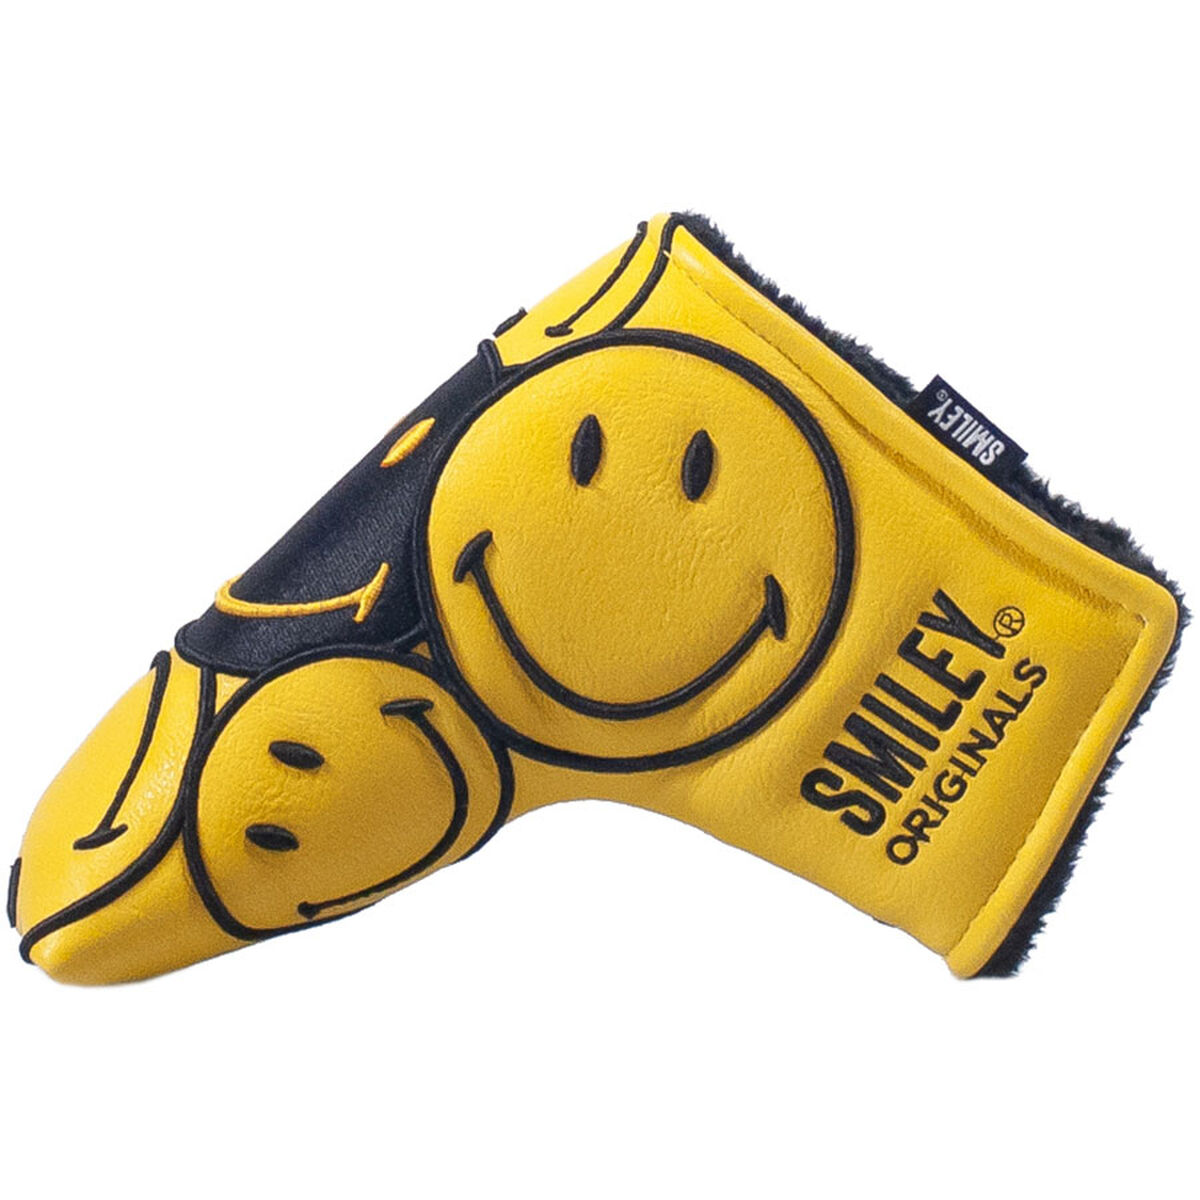 Smiley Original Stacked Blade Golf Putter Head Cover, Mens, Blade, Yellow/black | American Golf